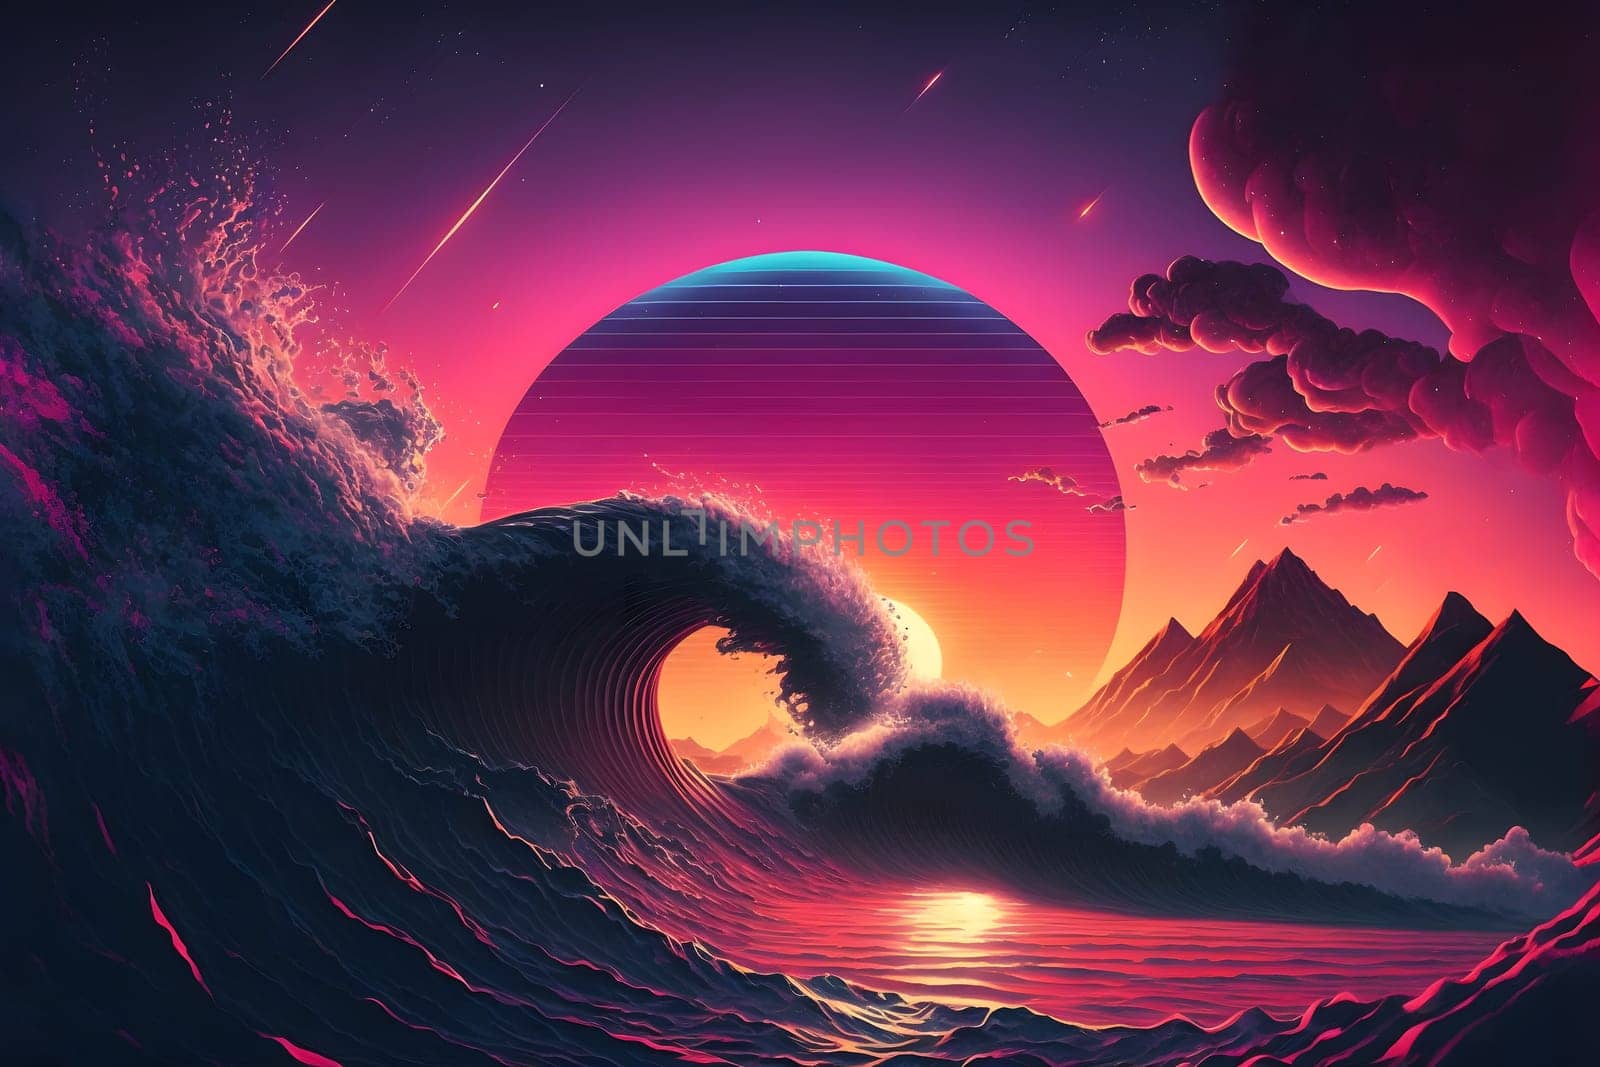 ocean wave at purple sunset in retro style, neural network generated art by z1b